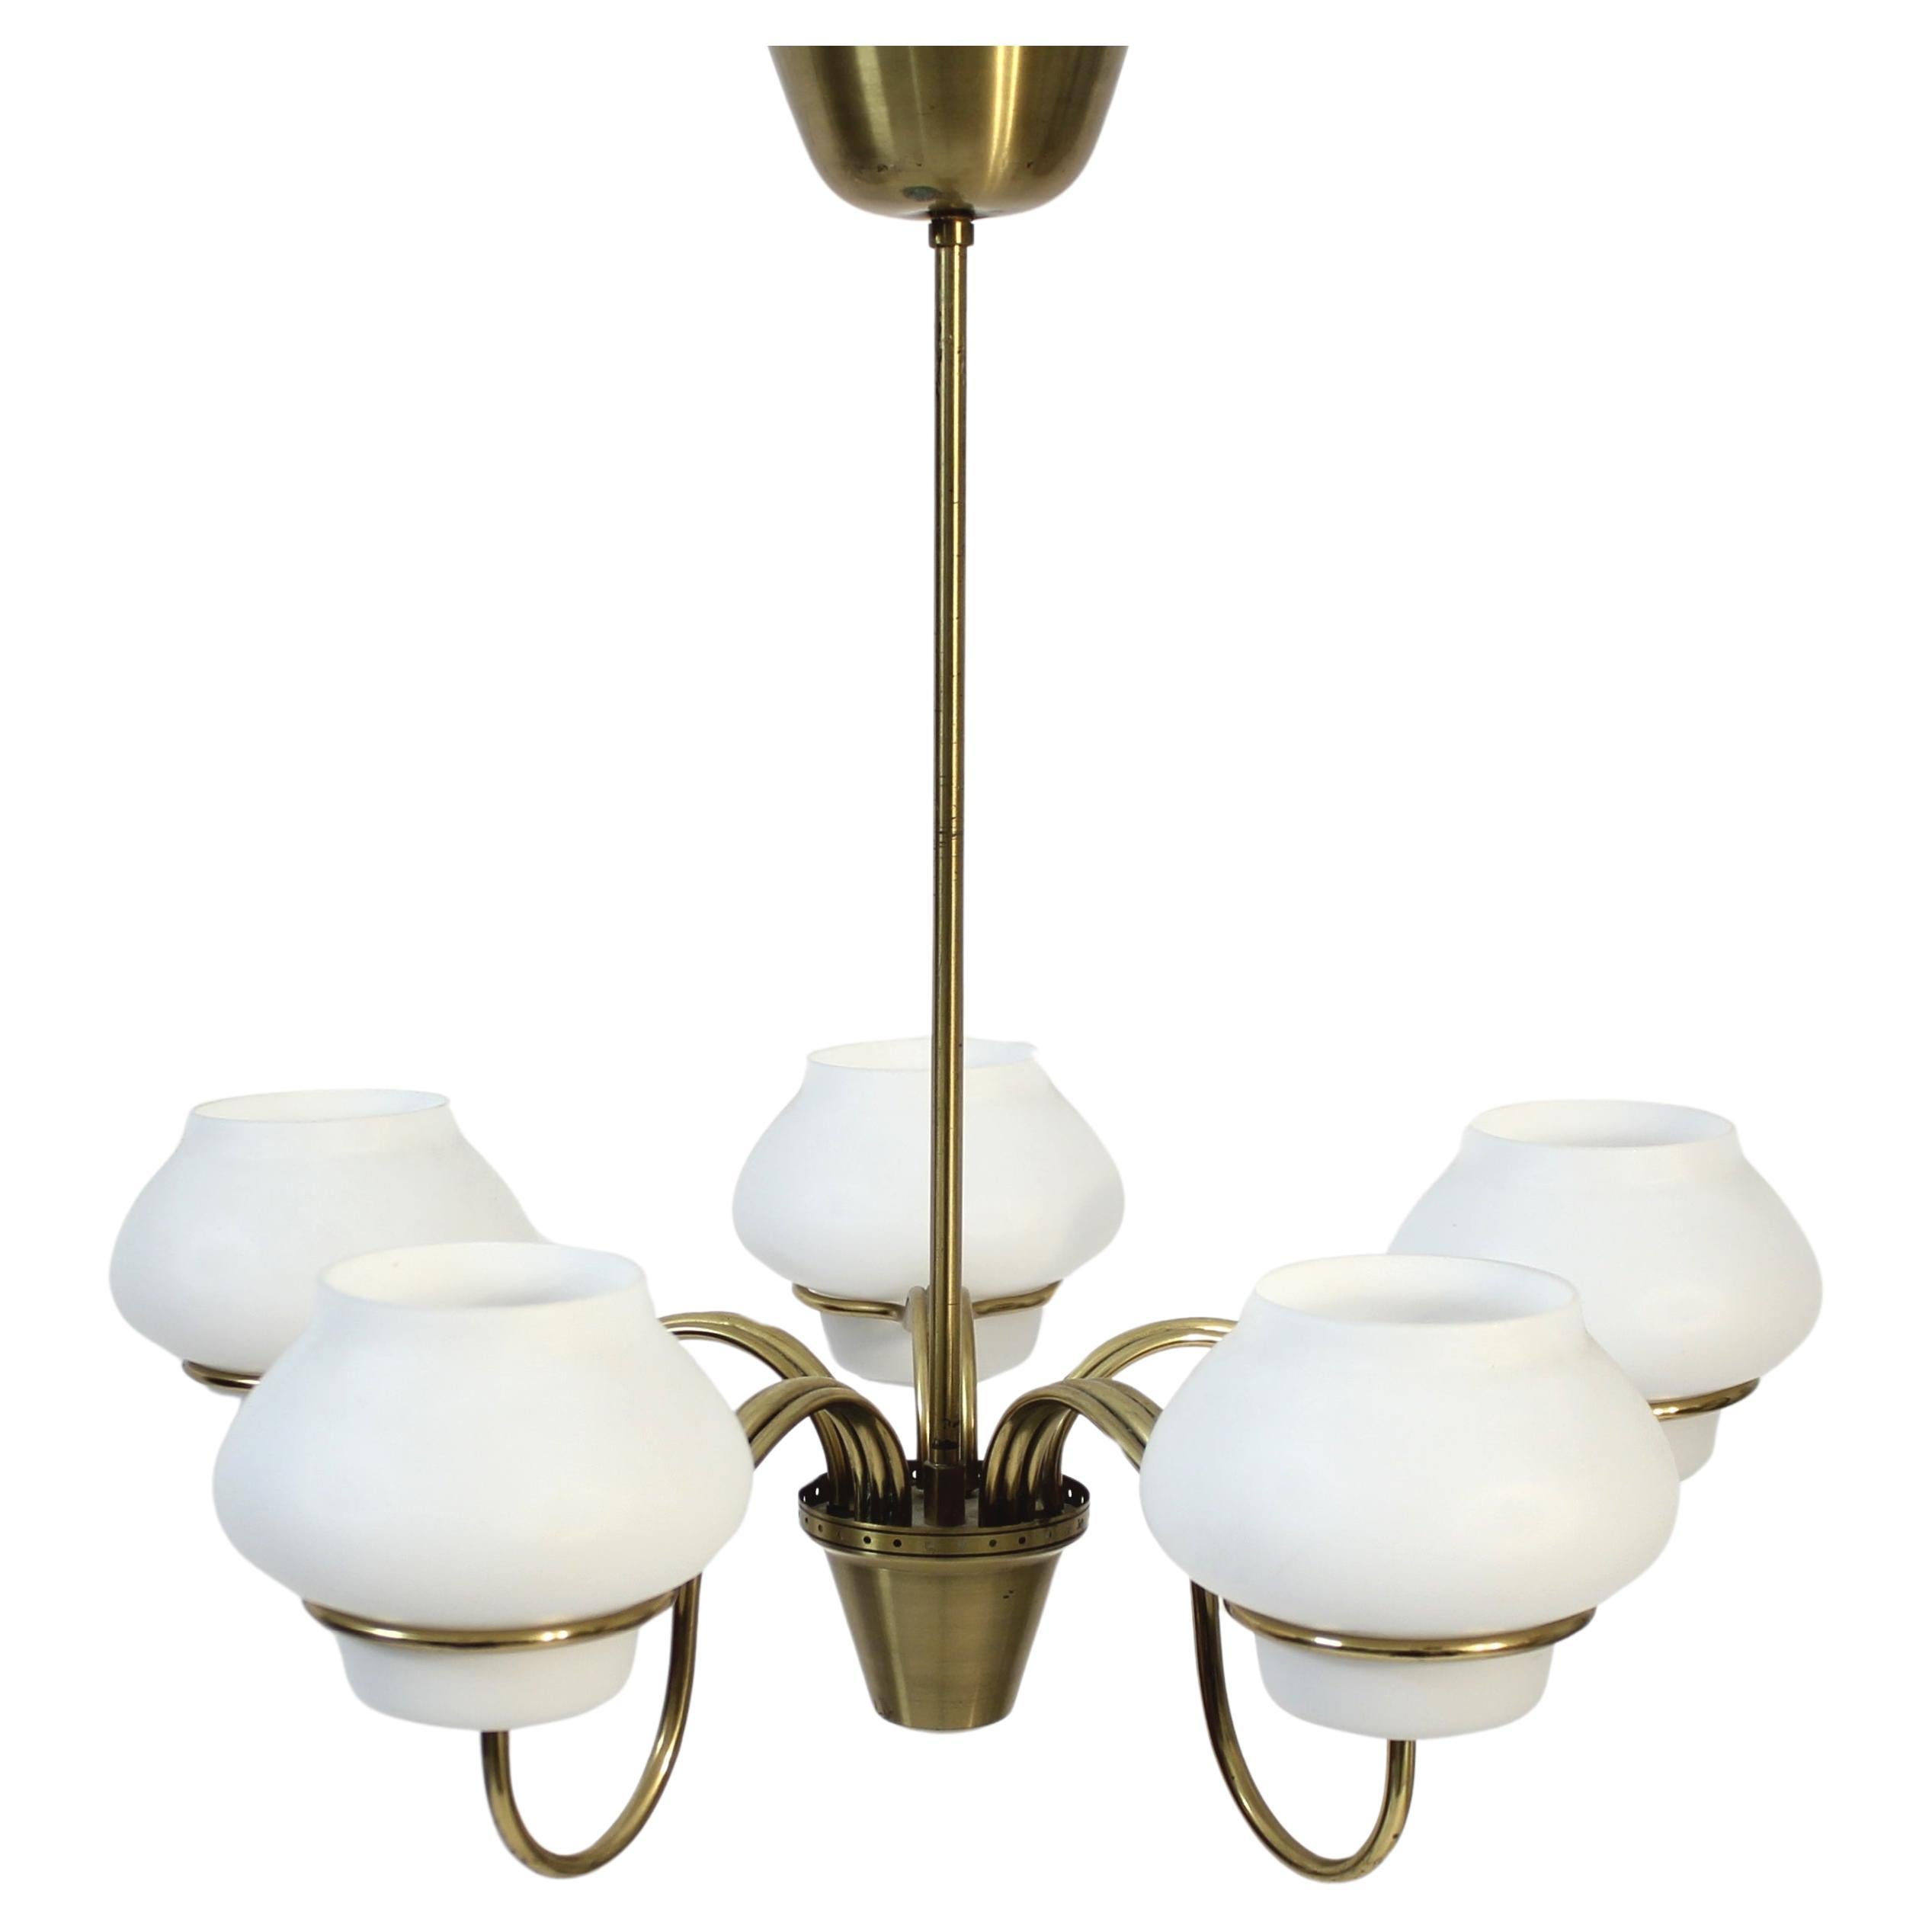 5-light ceiling mounted chandelier attributed to Gunnar Asplund for ASEA but unmarked. It has opalin glass shades on a brass frame. The mount of the shades are very much like a few other models designed by Asplund. Very good vintage condition with